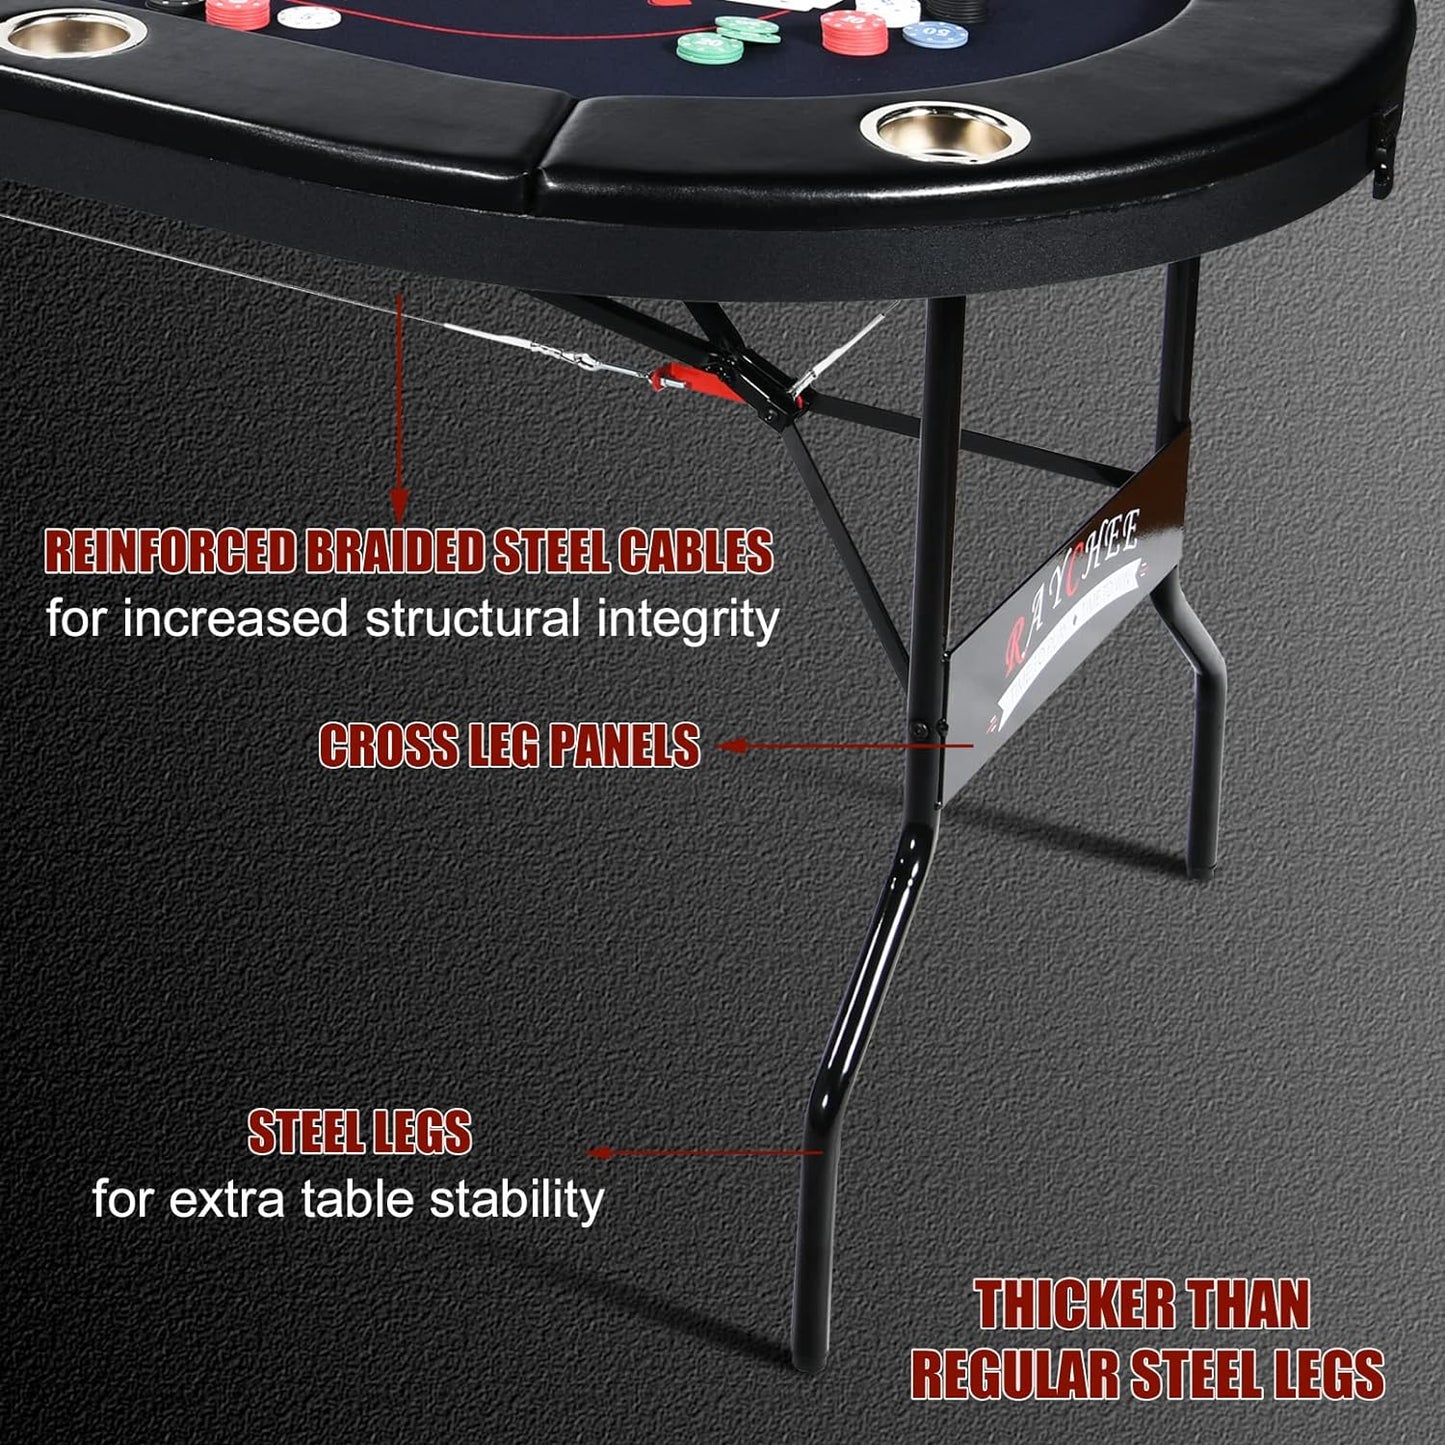 8 Player Foldable Poker Table, Texas Holdem Table, Folding Leisure Game Table, Portable Casino Table for Game Room with Padded Rails and Cup Holders (Black, 71 Inch)